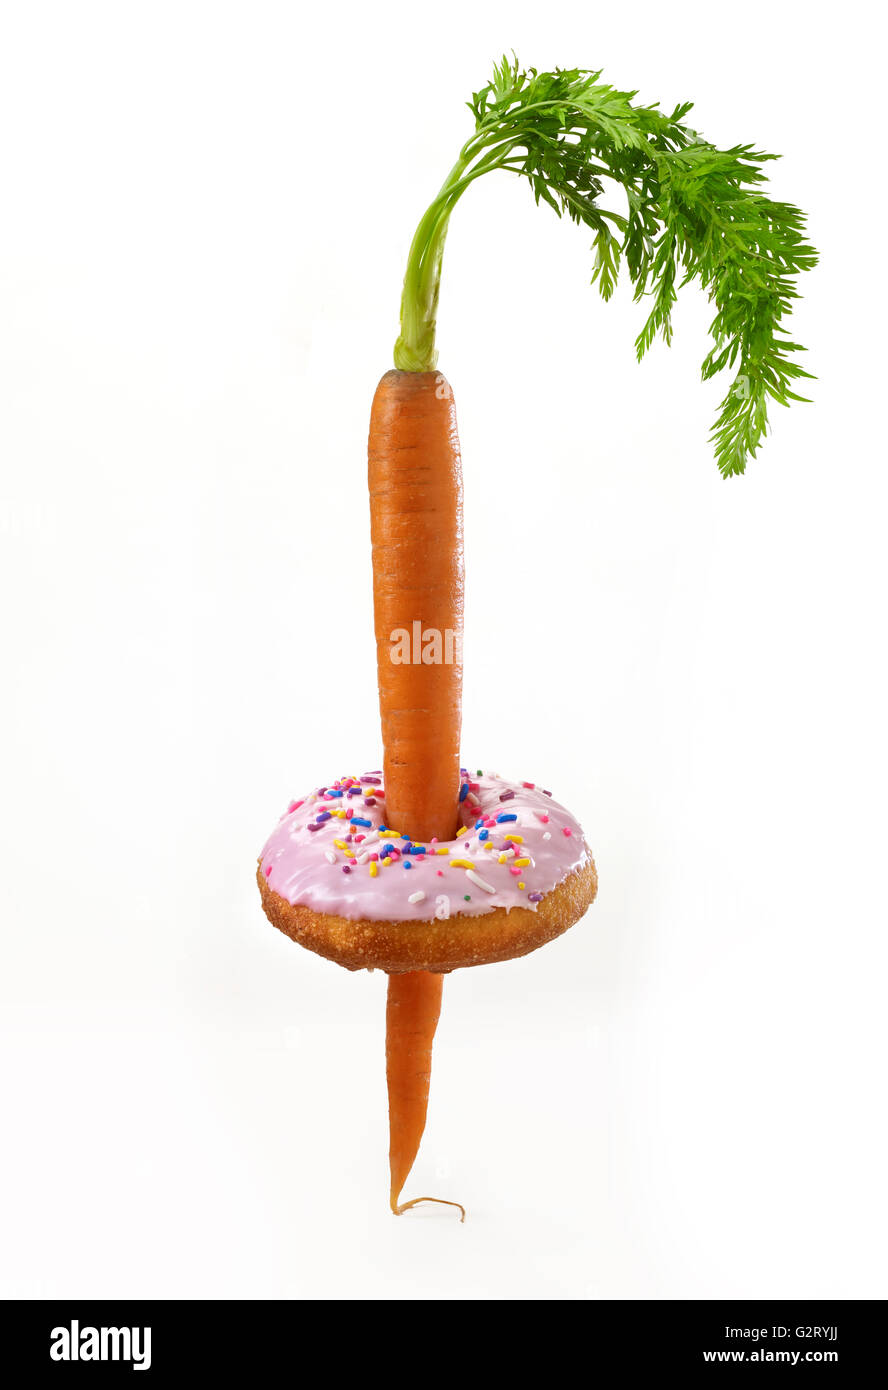 Diet Weight Loss Carrot & Donut Stock Photo